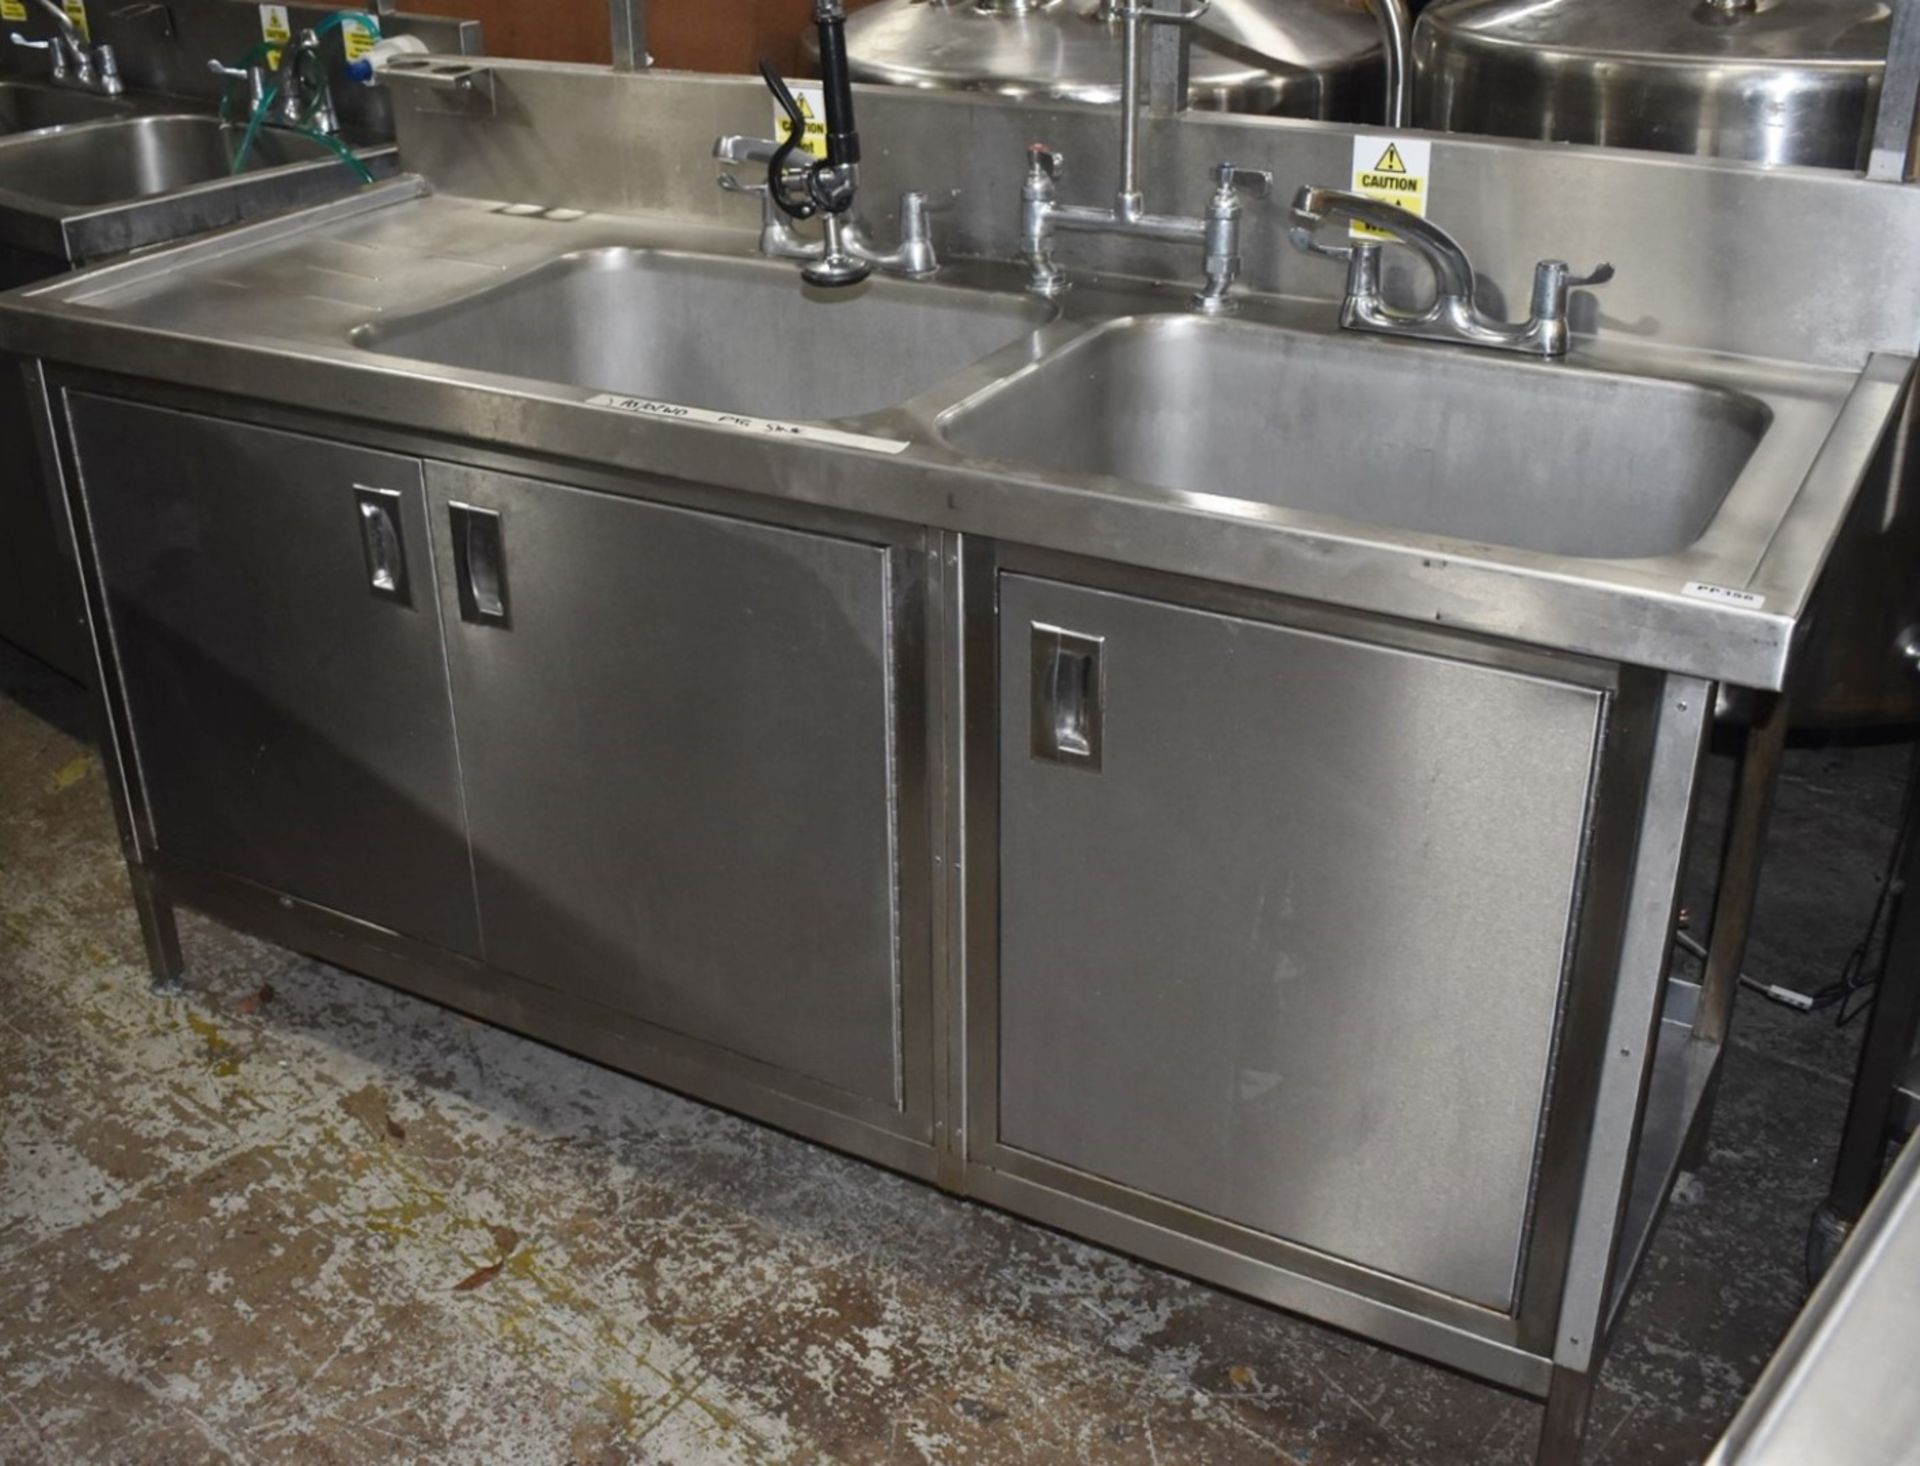 1 x Commercial Kitchen Wash Station With Two Large Sink Bowls, Mixer Taps, Spray Wash Gun,